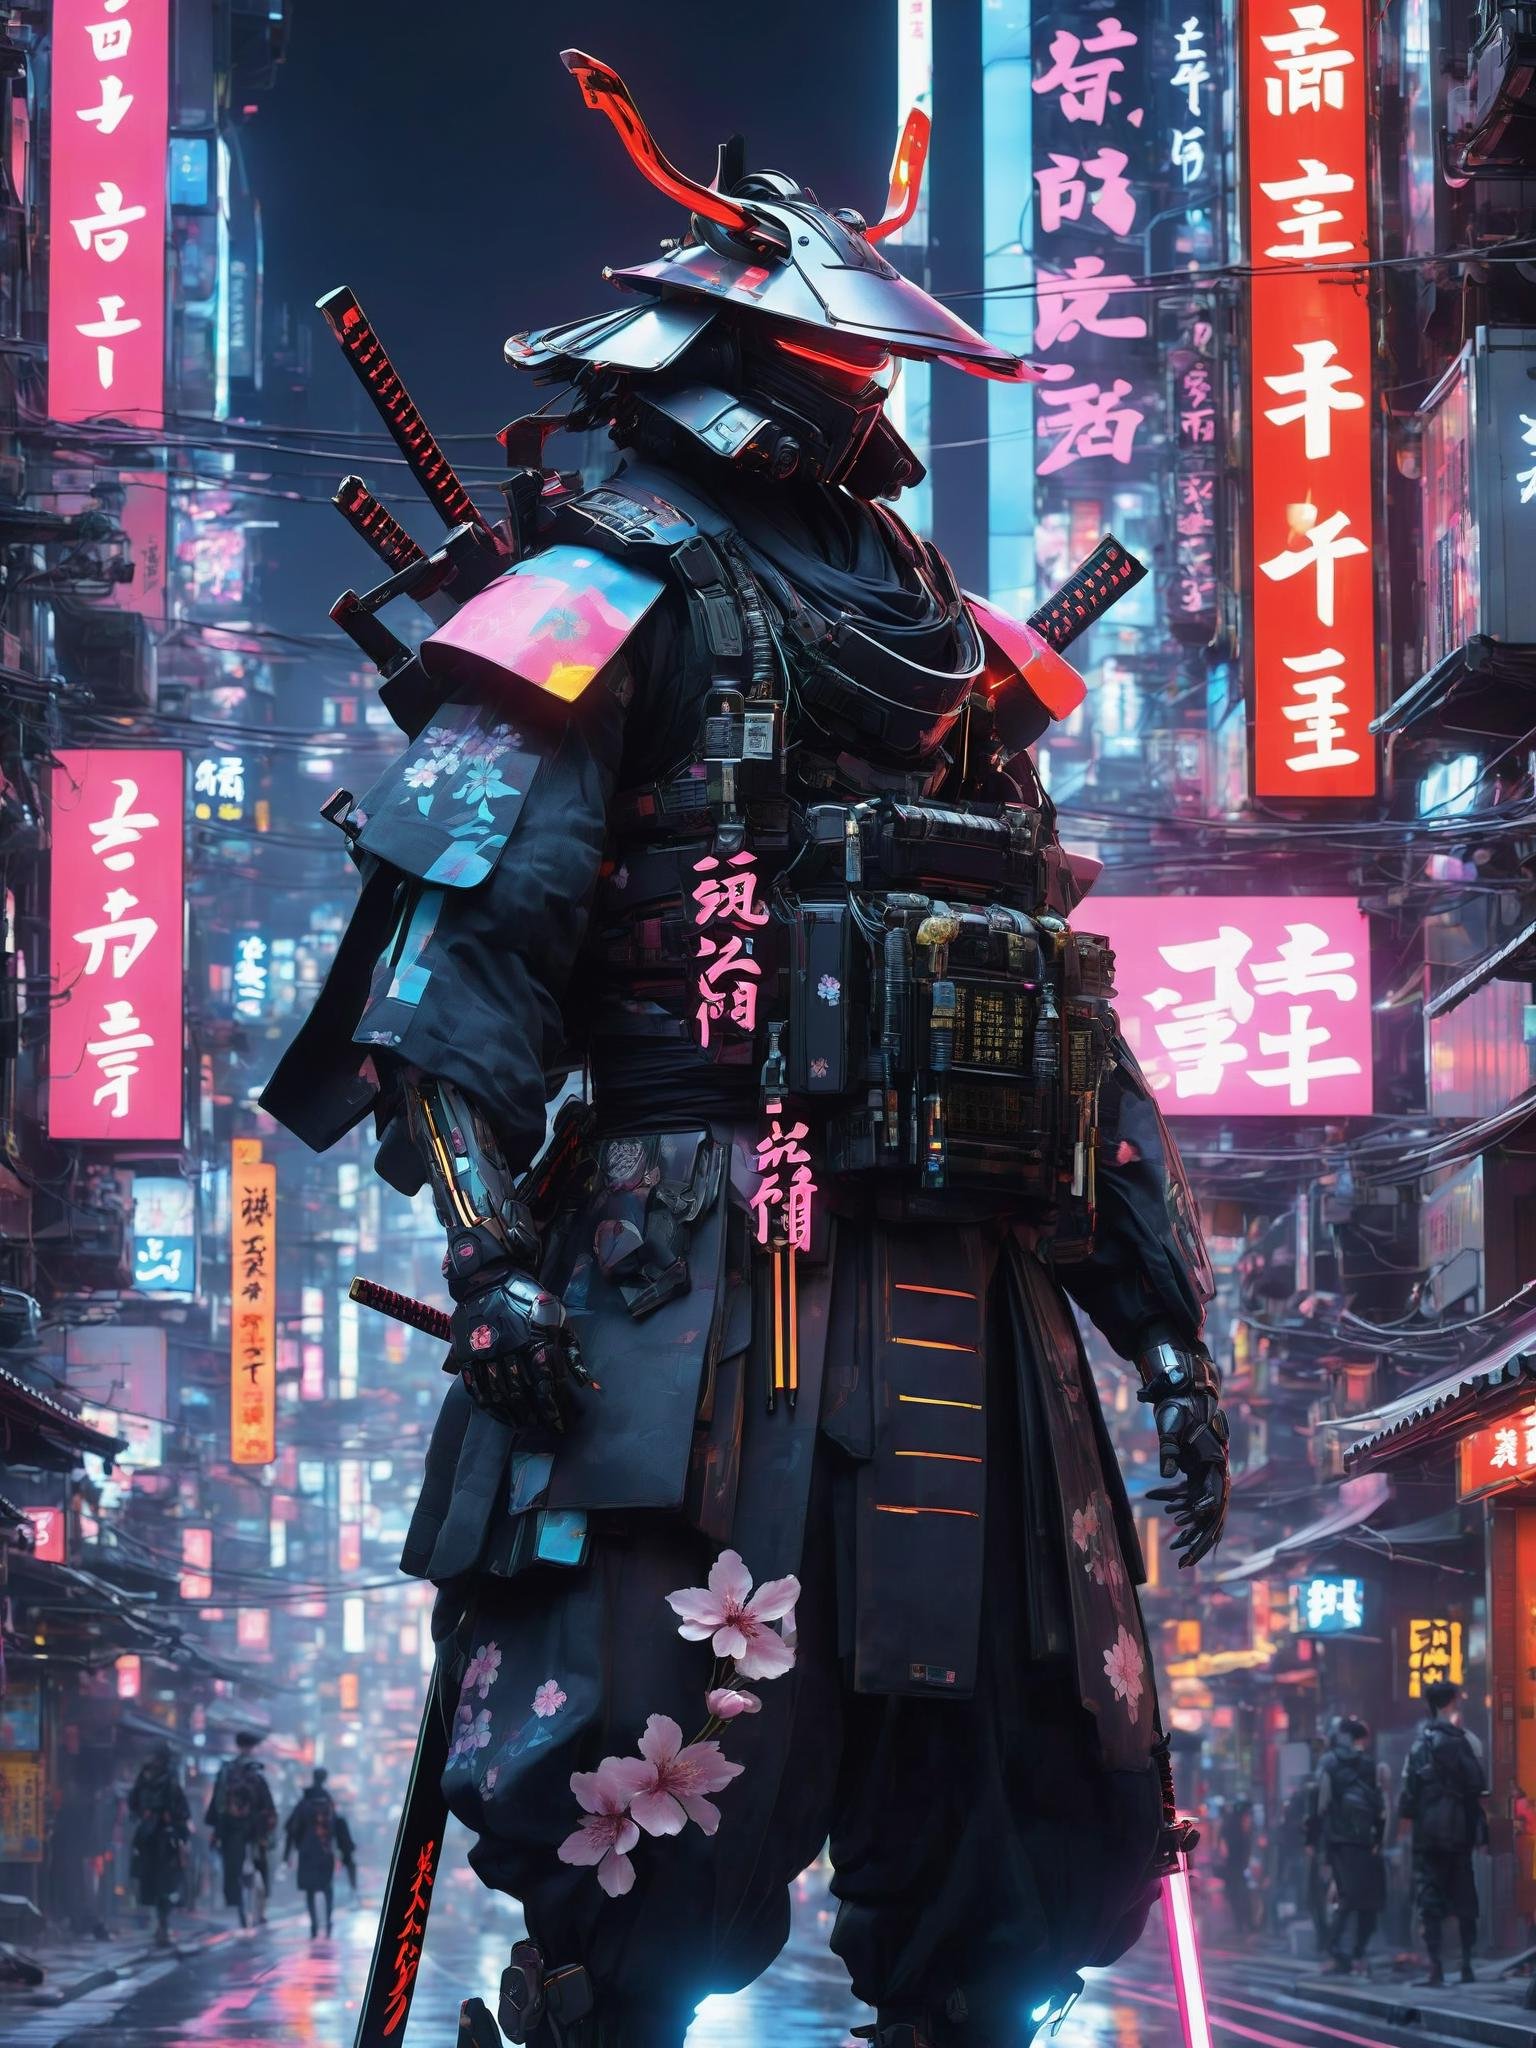 In a futuristic cyberpunk world blending traditional Japanese aesthetics with advanced technology, a lone cyborg samurai roams the neon-lit streets. Clad in sleek armor adorned with intricate kanji symbols, their cybernetic enhancements seamlessly integrated with the ancient art of swordsmanship. The cityscape, a fusion of soaring skyscrapers and traditional pagoda-style structures, pulsates with vibrant holographic billboards displaying kanji characters and futuristic neon signs. Amongst the chaos of the bustling metropolis, cherry blossom petals dance in the air, a poignant reminder of the harmony between nature and the cybernetic urban sprawl. The samurai's katana, equipped with holographic enhancements, reflects the neon glow, ready to defend honor and tradition in this techno-oriental landscape , <lora:ByteBlade:1>